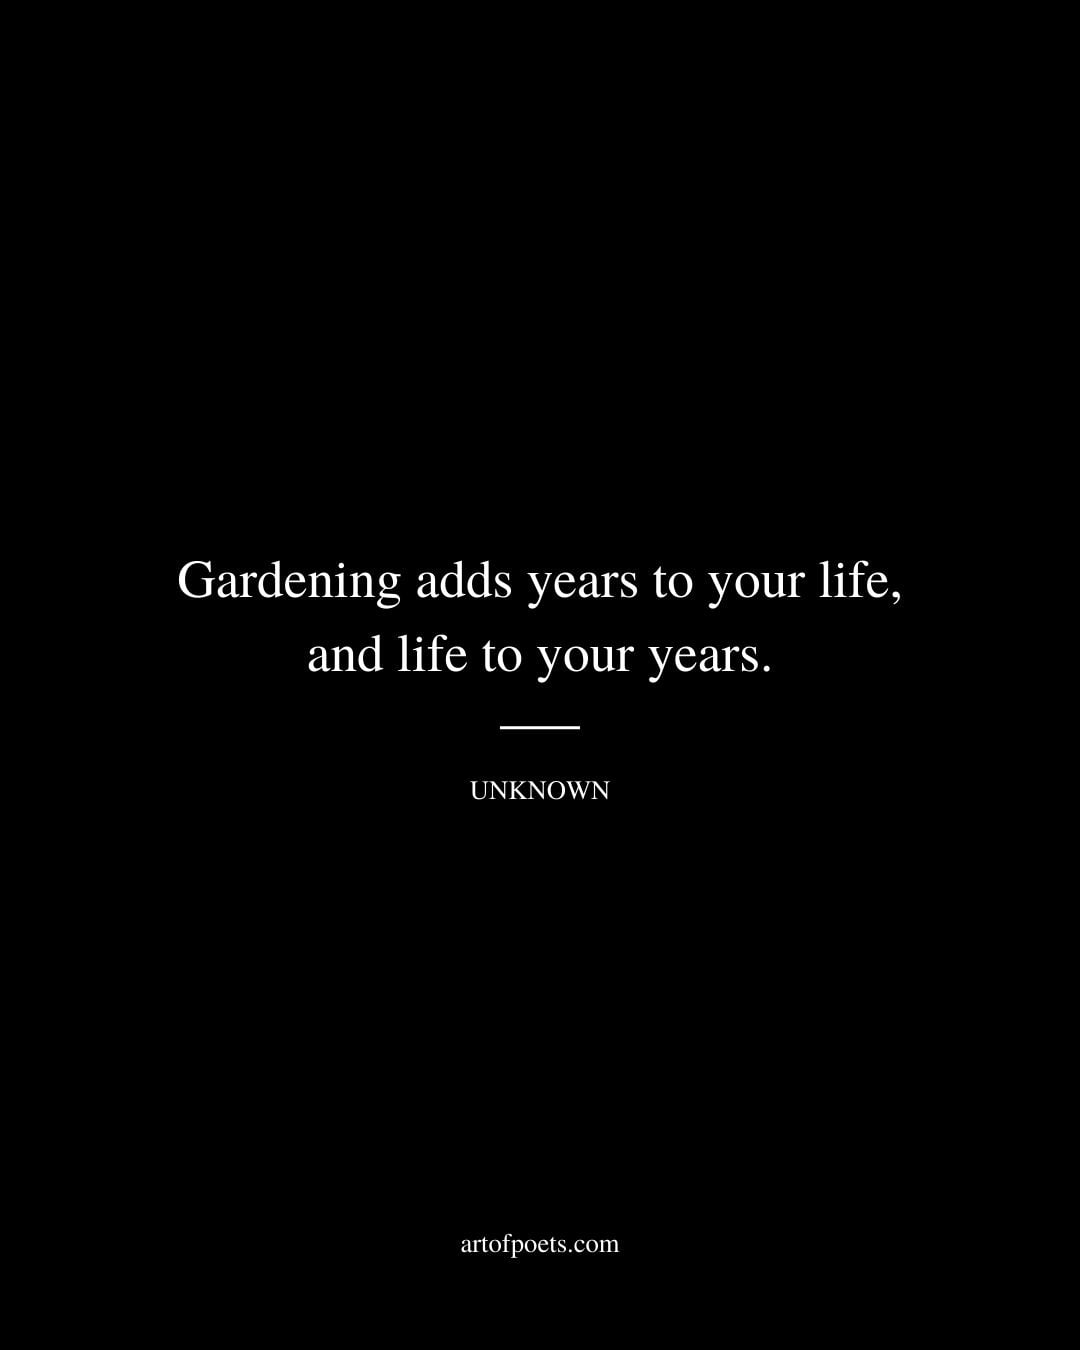 Gardening adds years to your life and life to your years. Unknown